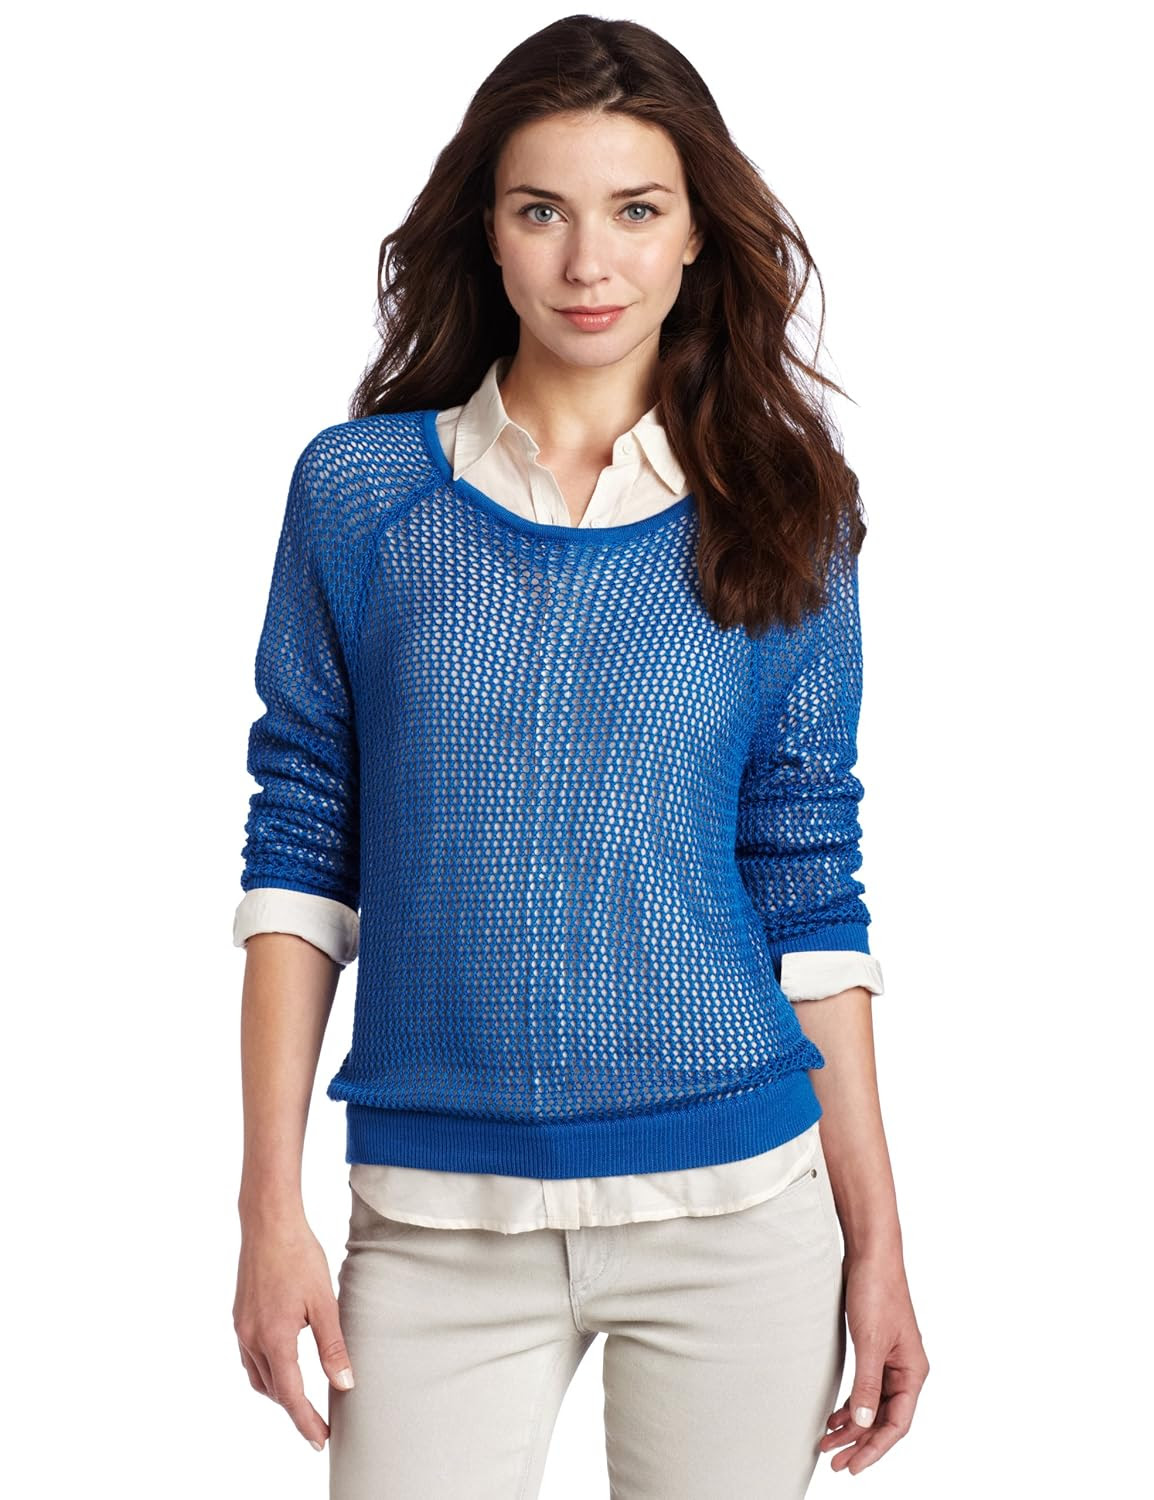 Mesh Pullover Sweater By 525 America | Women Fashion Online Store